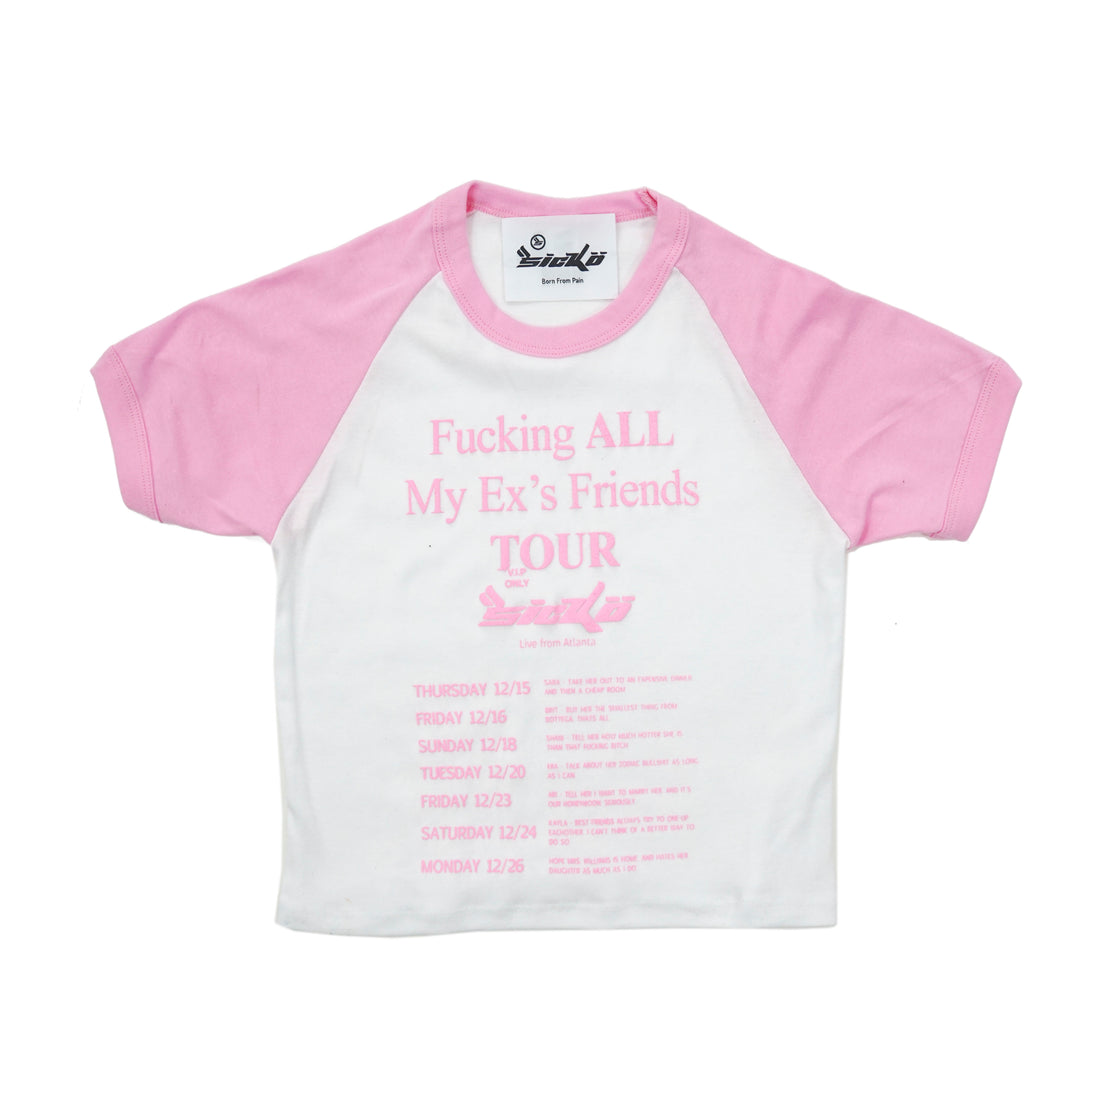 Sïcko Ex's Tour Cropped Baby Tee - White / Pink